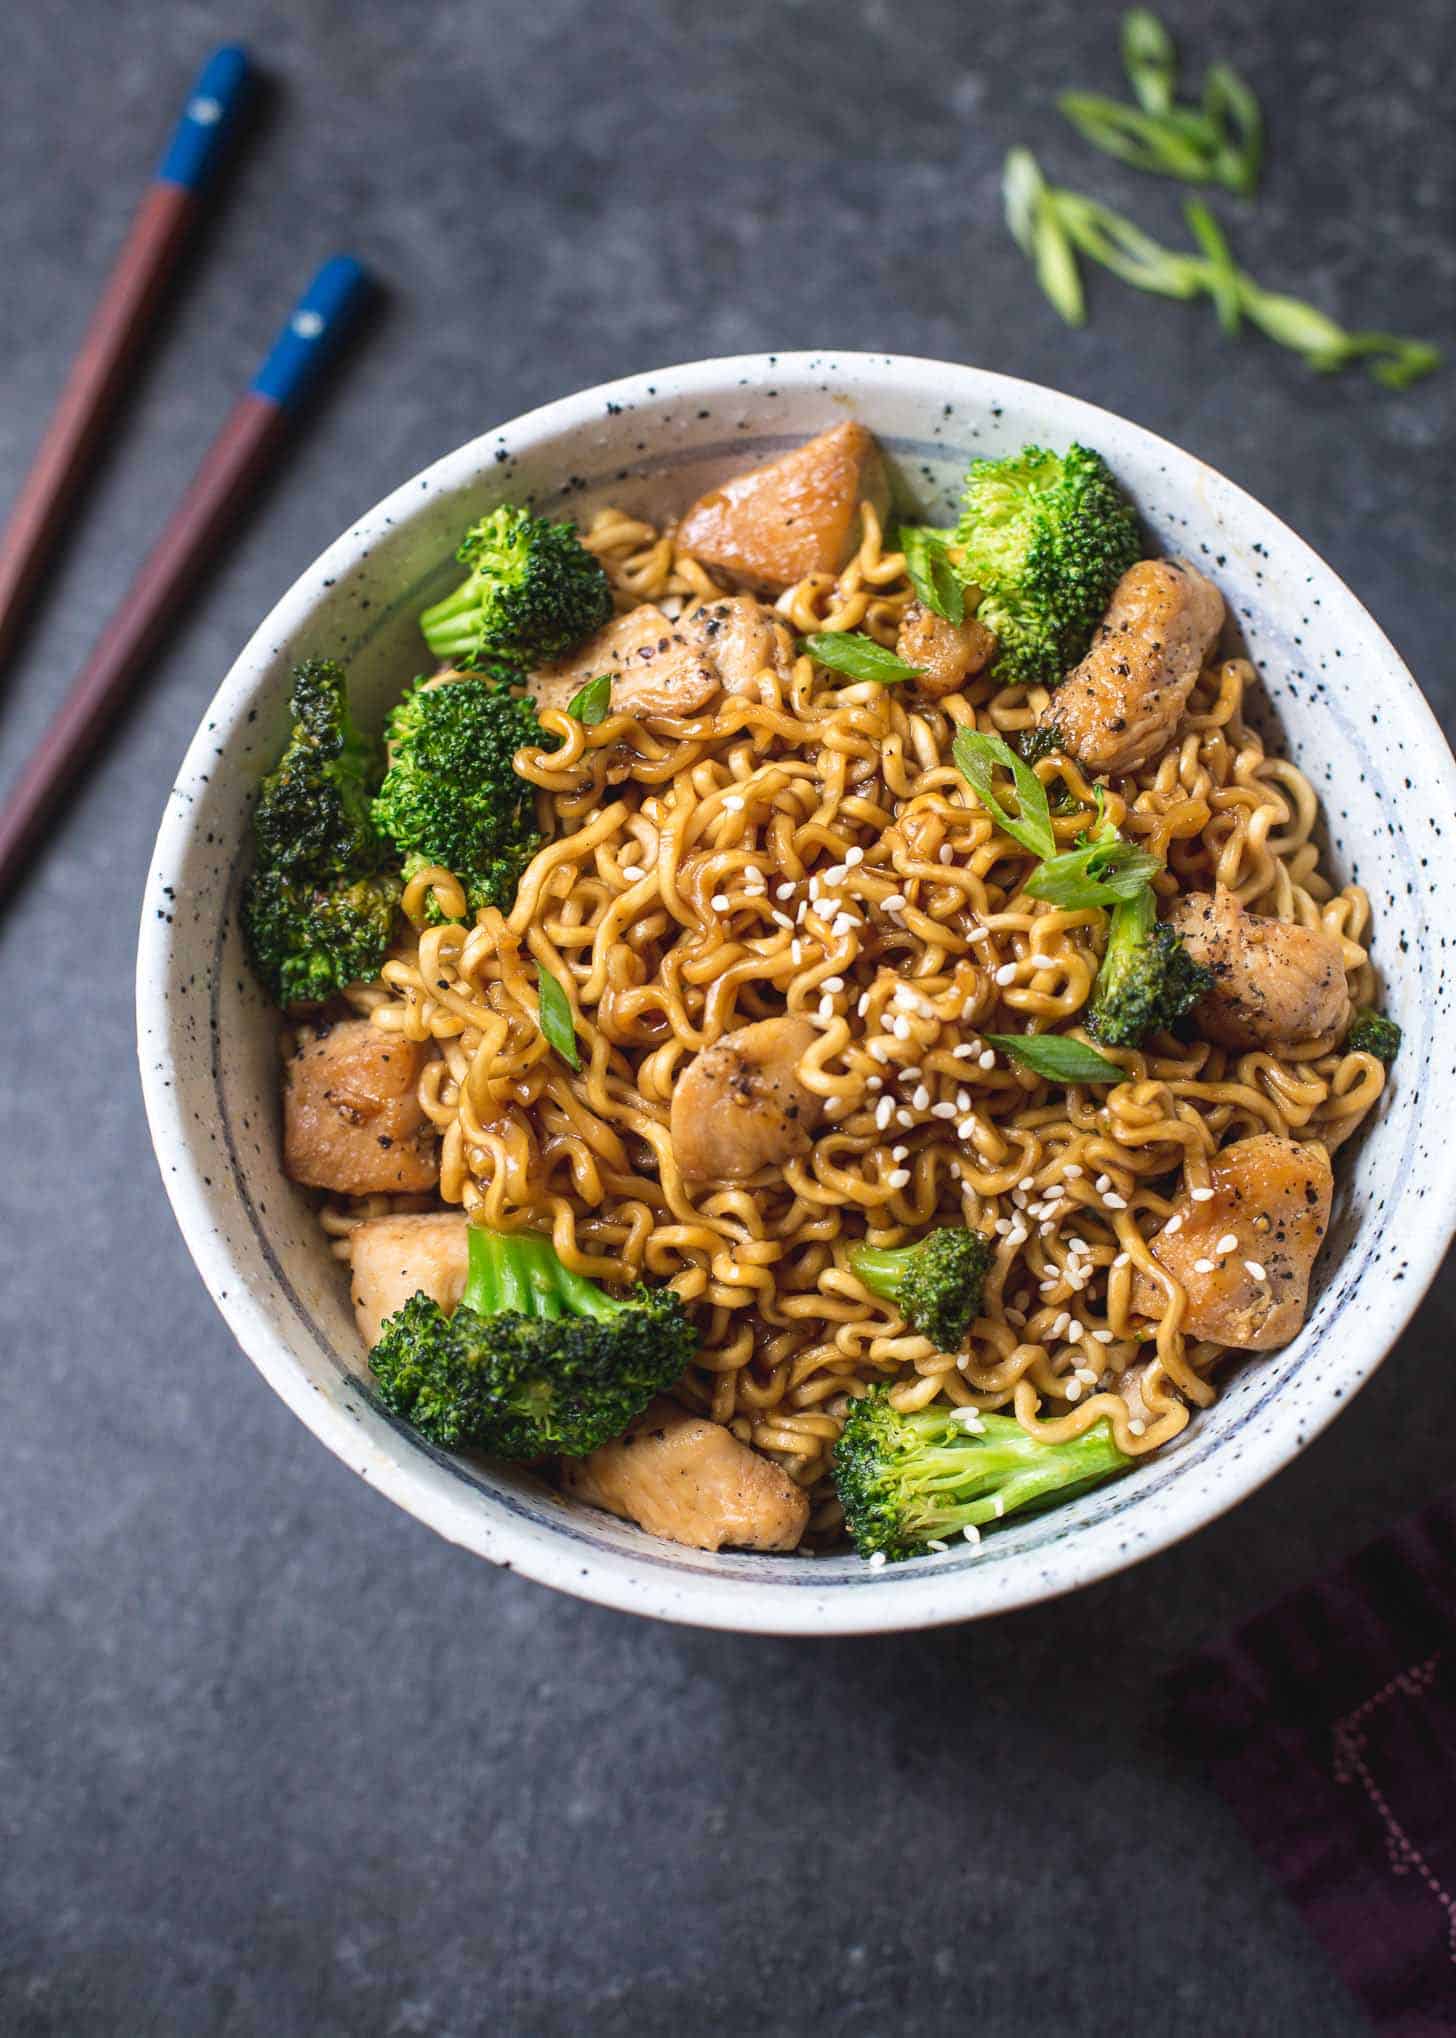 What Meals Can You Make With Ramen Noodles?